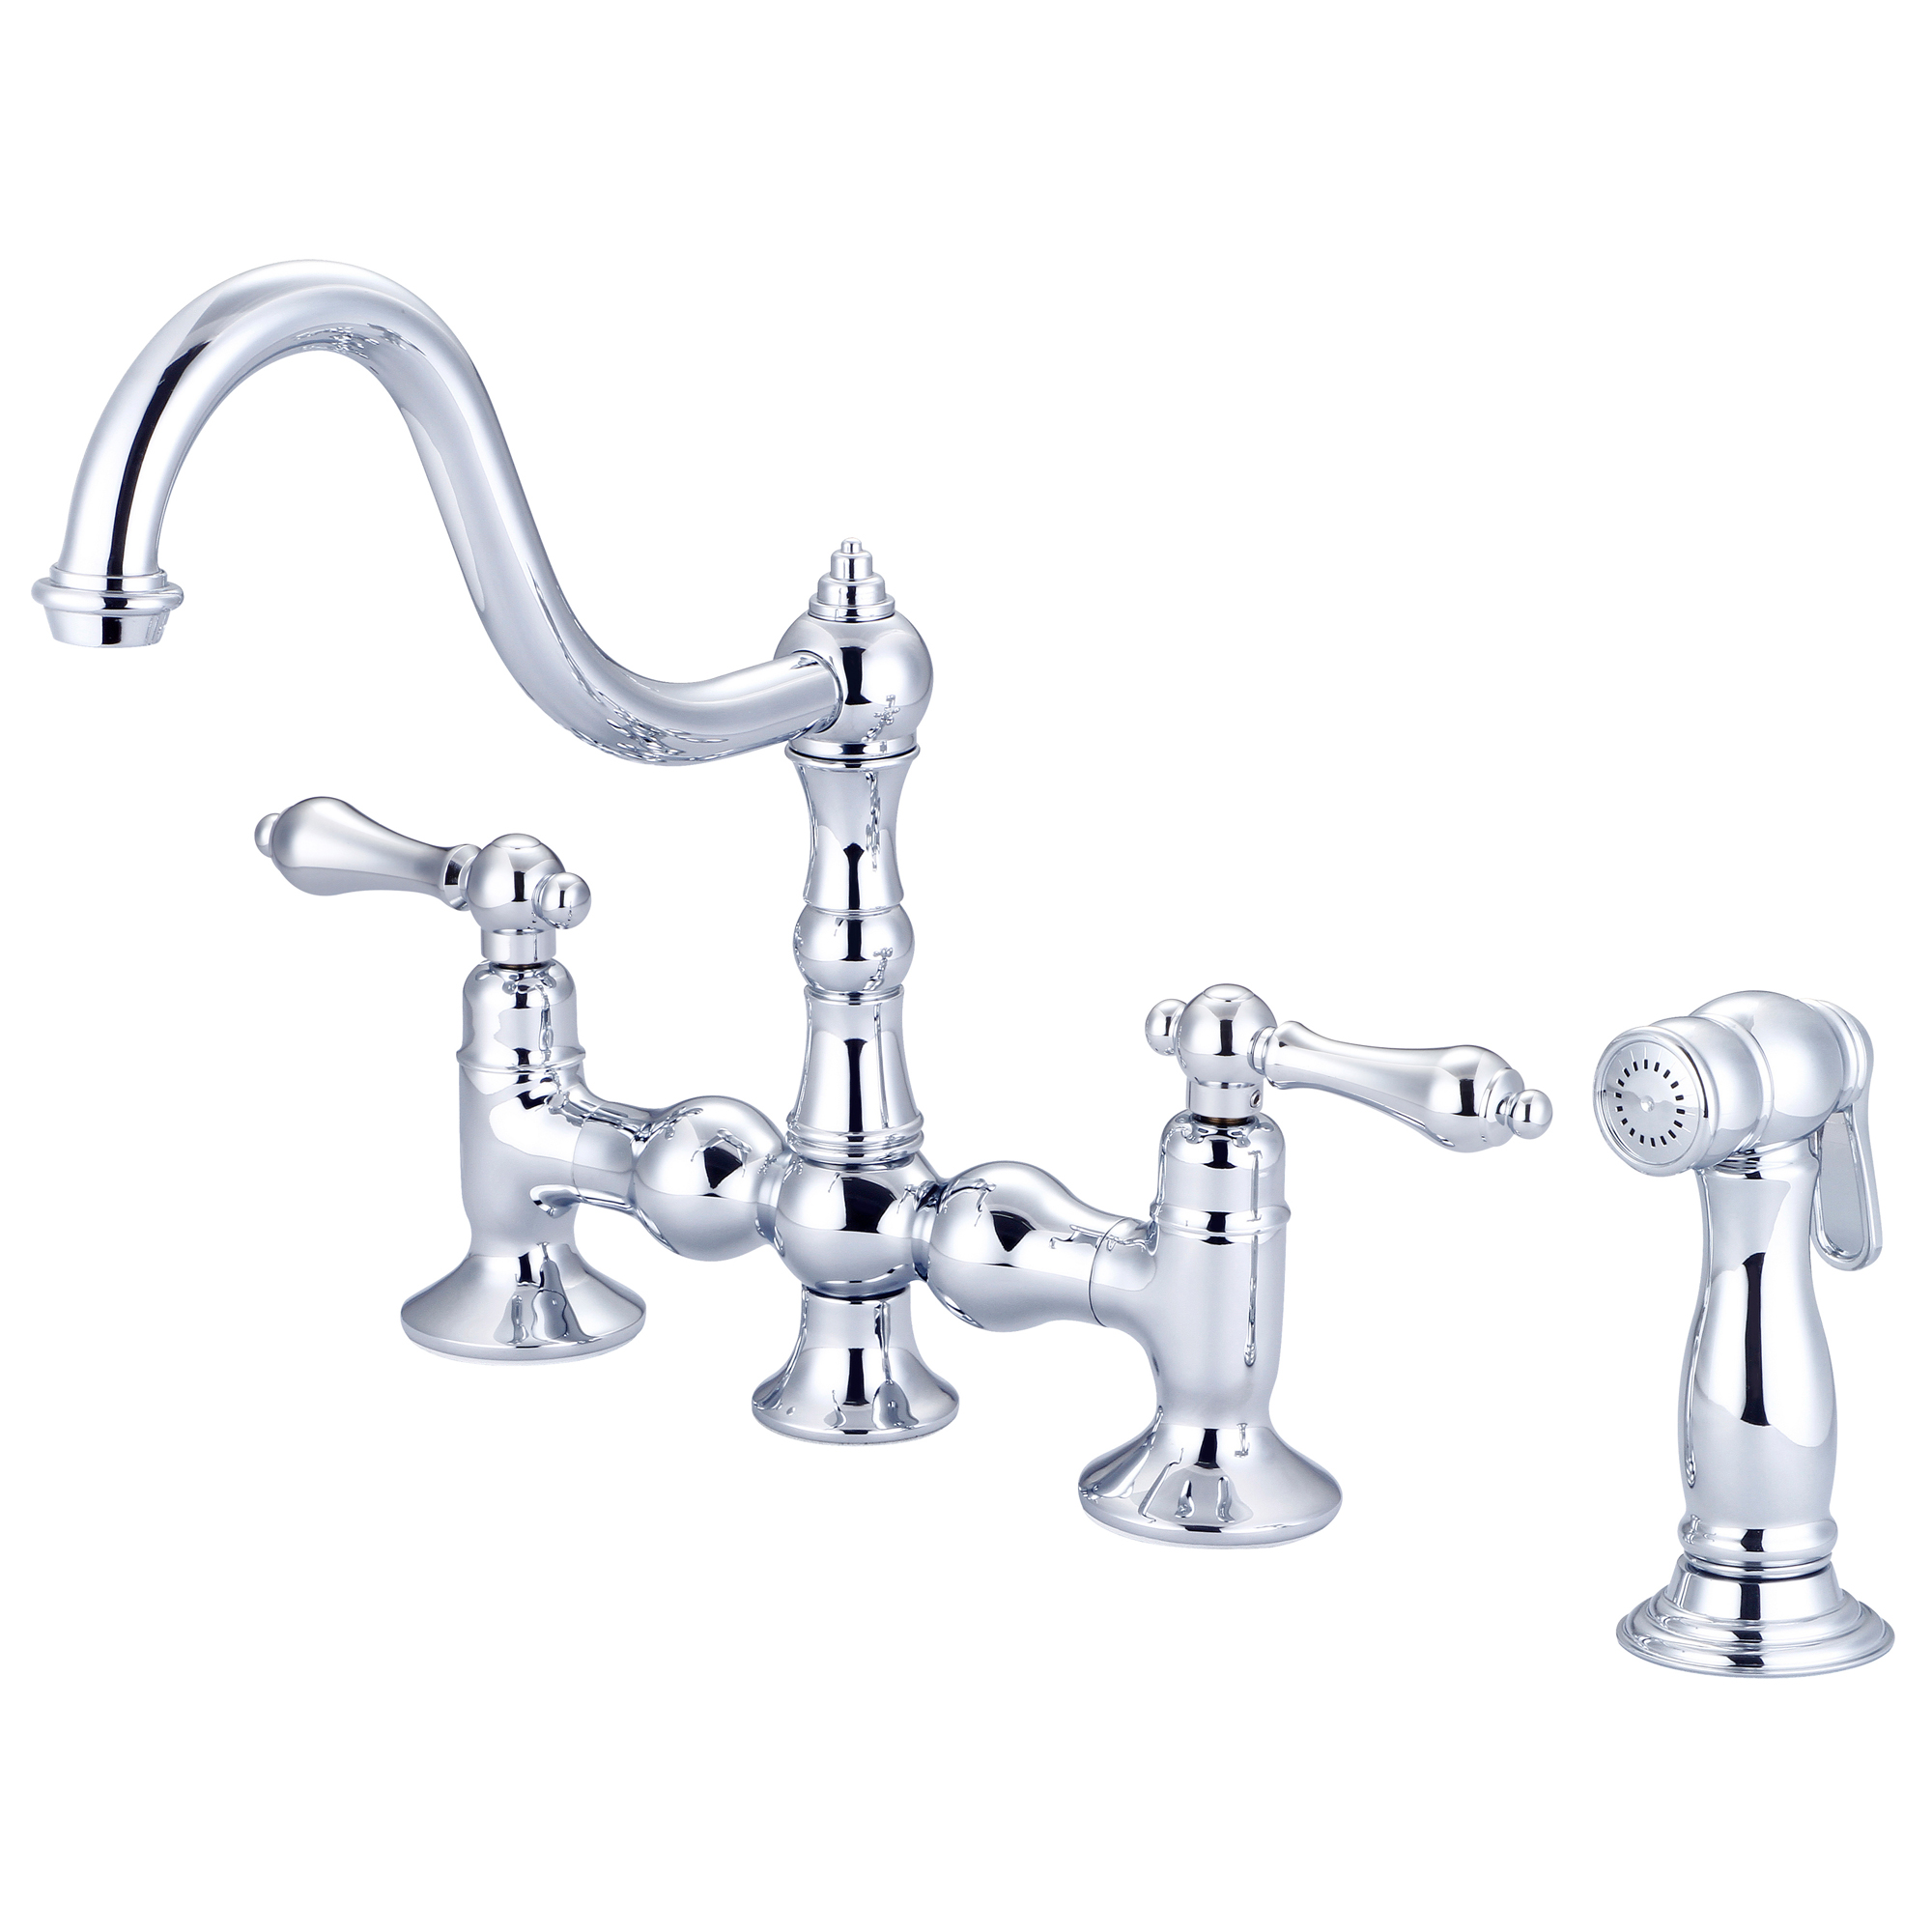 Bridge Style Kitchen Faucet With Side Spray To Match in Chrome Finish With Metal Lever Handles Without Labels